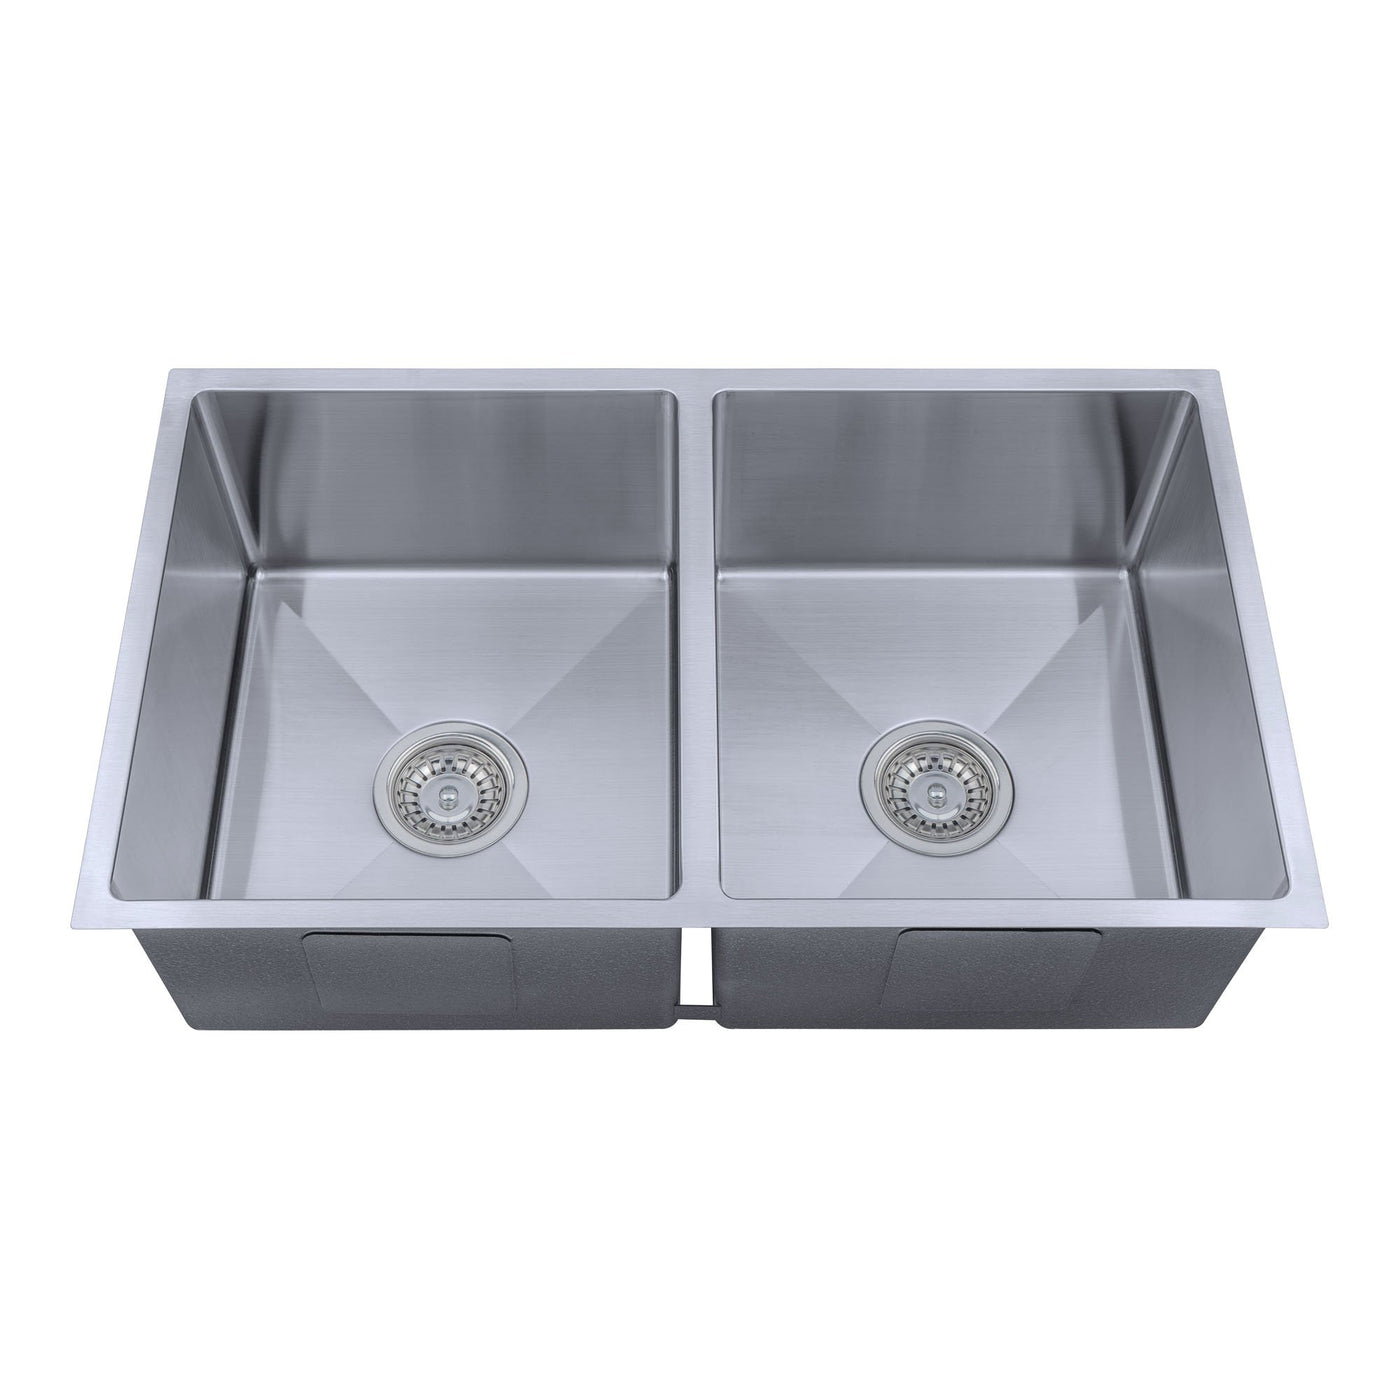 Comets Round Under/Overmount Double Bowl Sink